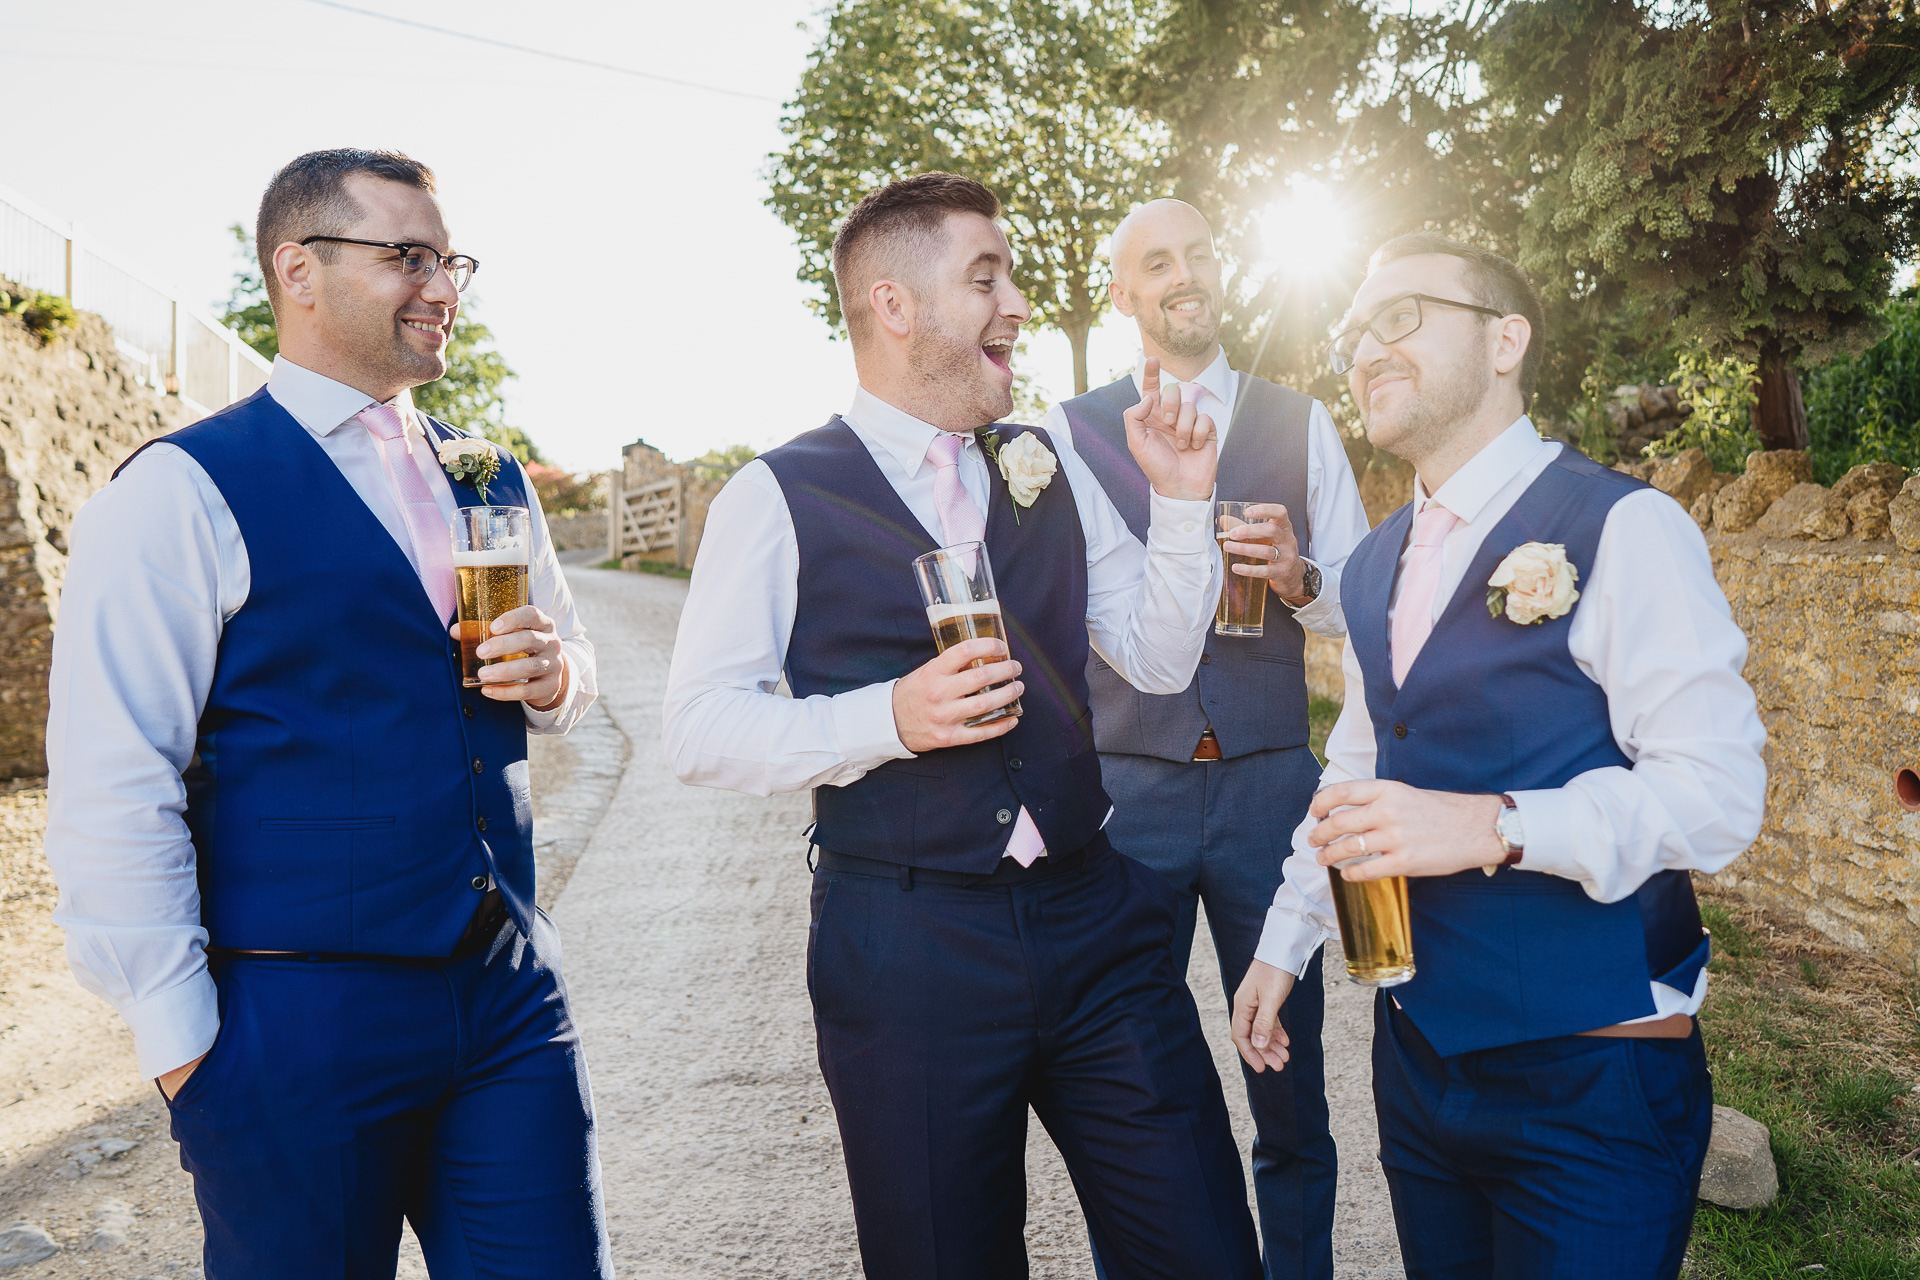 Group of groomsmen laughing together